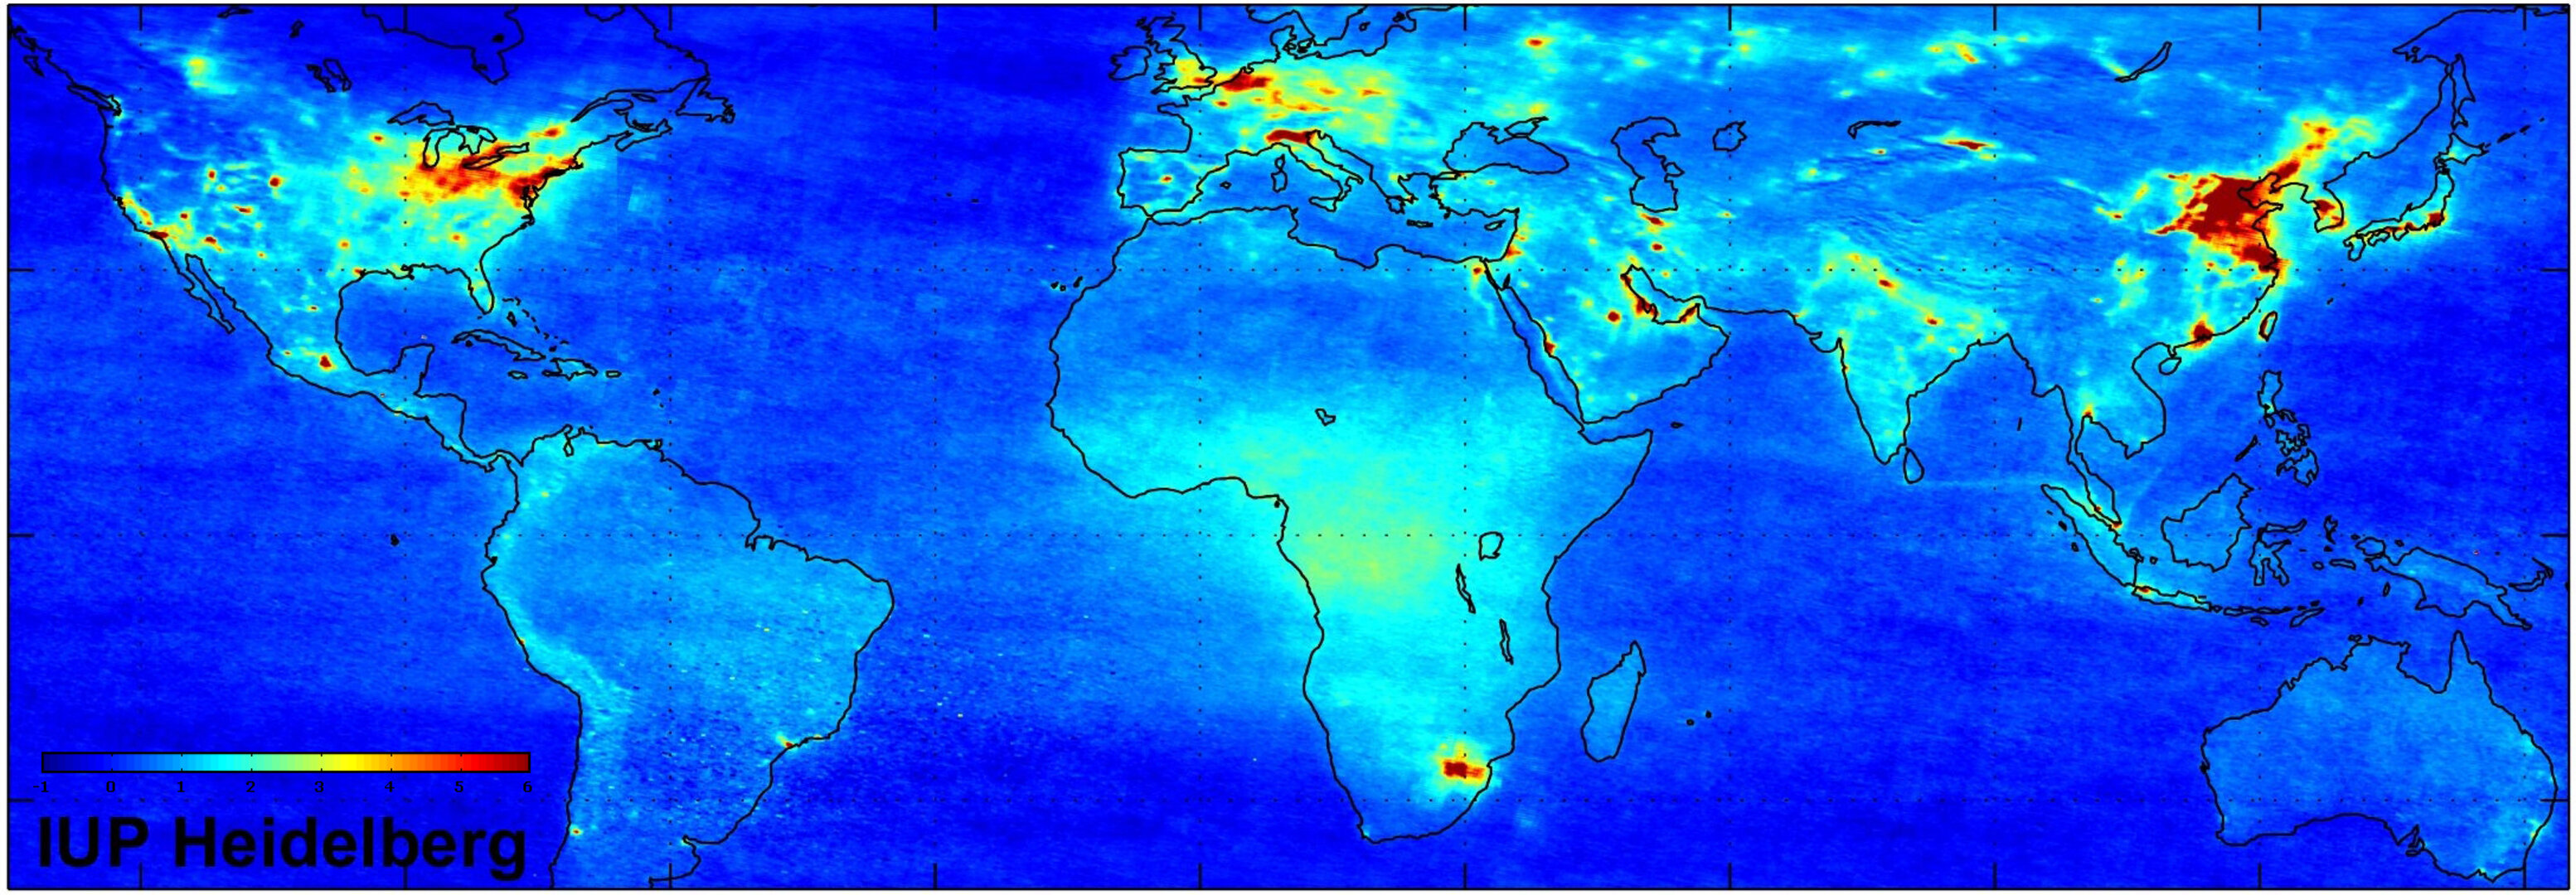 Global air pollution map produced by Envisat's SCIAMACHY